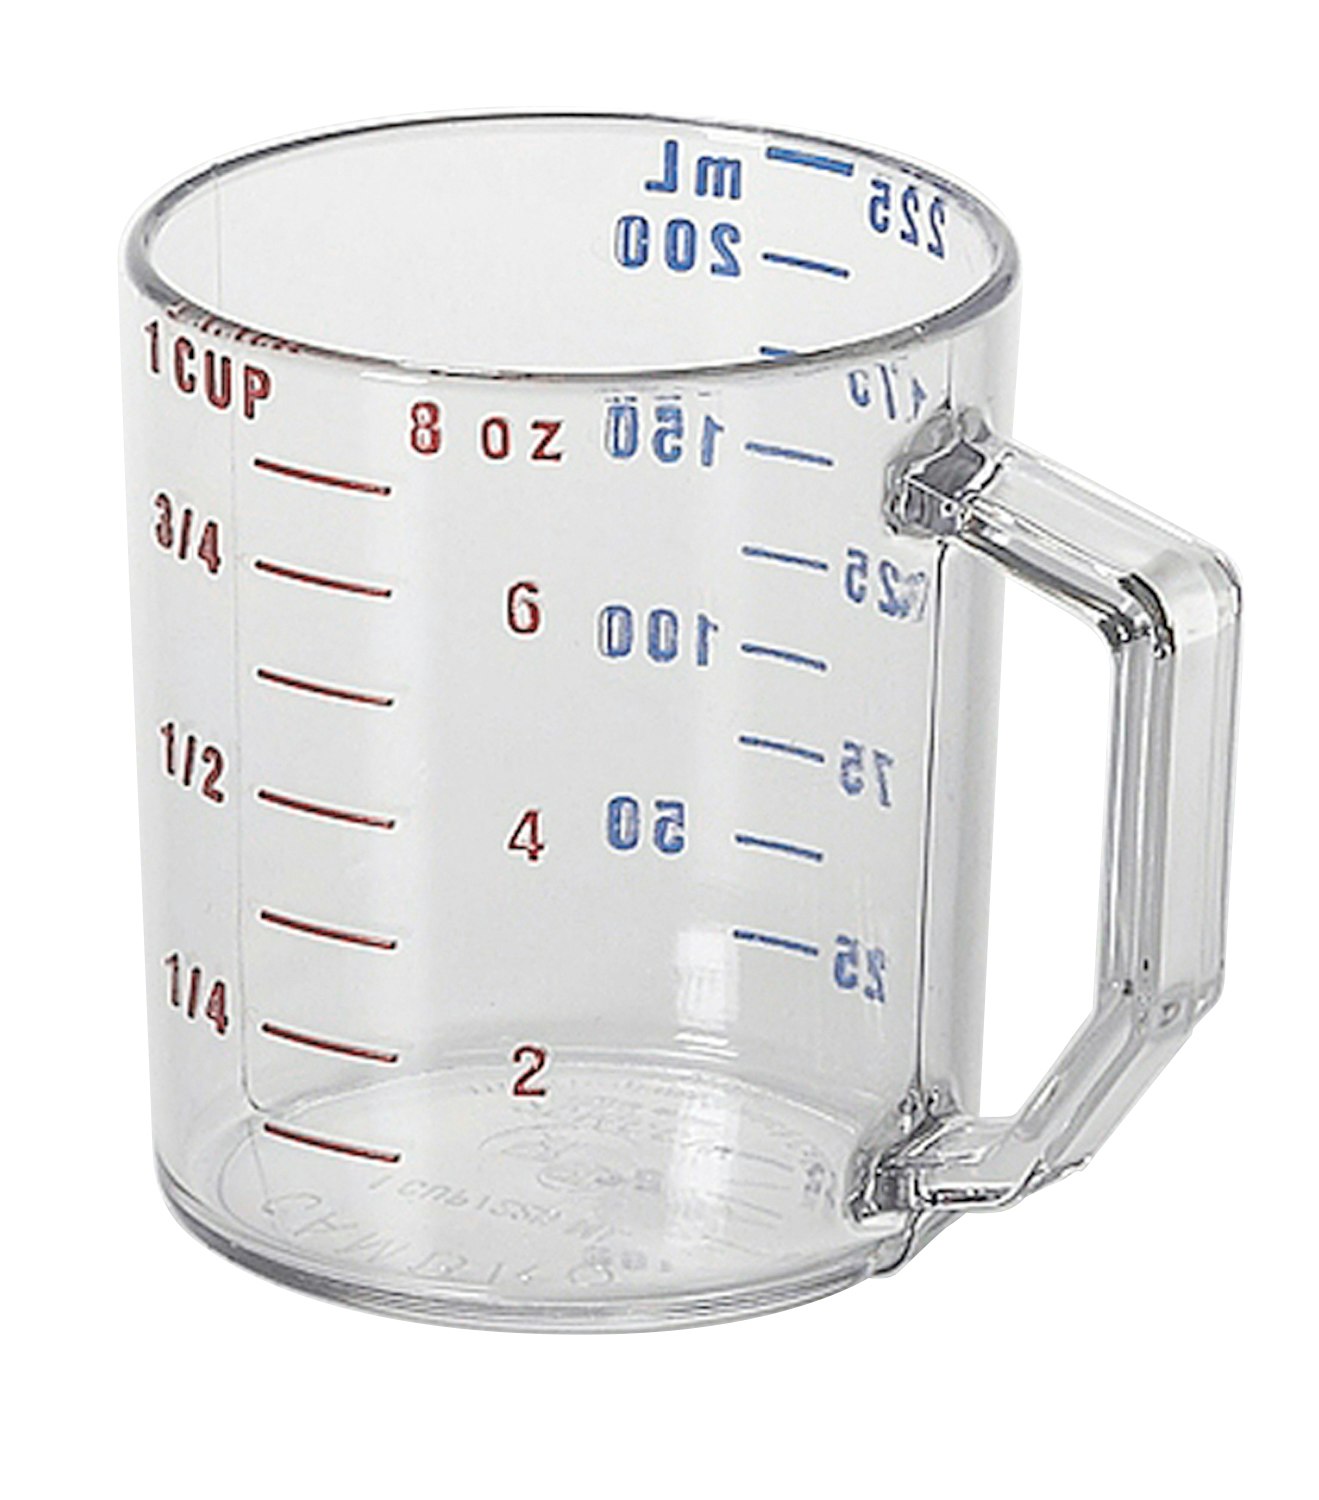 50cc Measuring Cups 50ml Clear Plastic Cup Free With Scale Small Cup  Wholesale From Exquisite558, $16.29